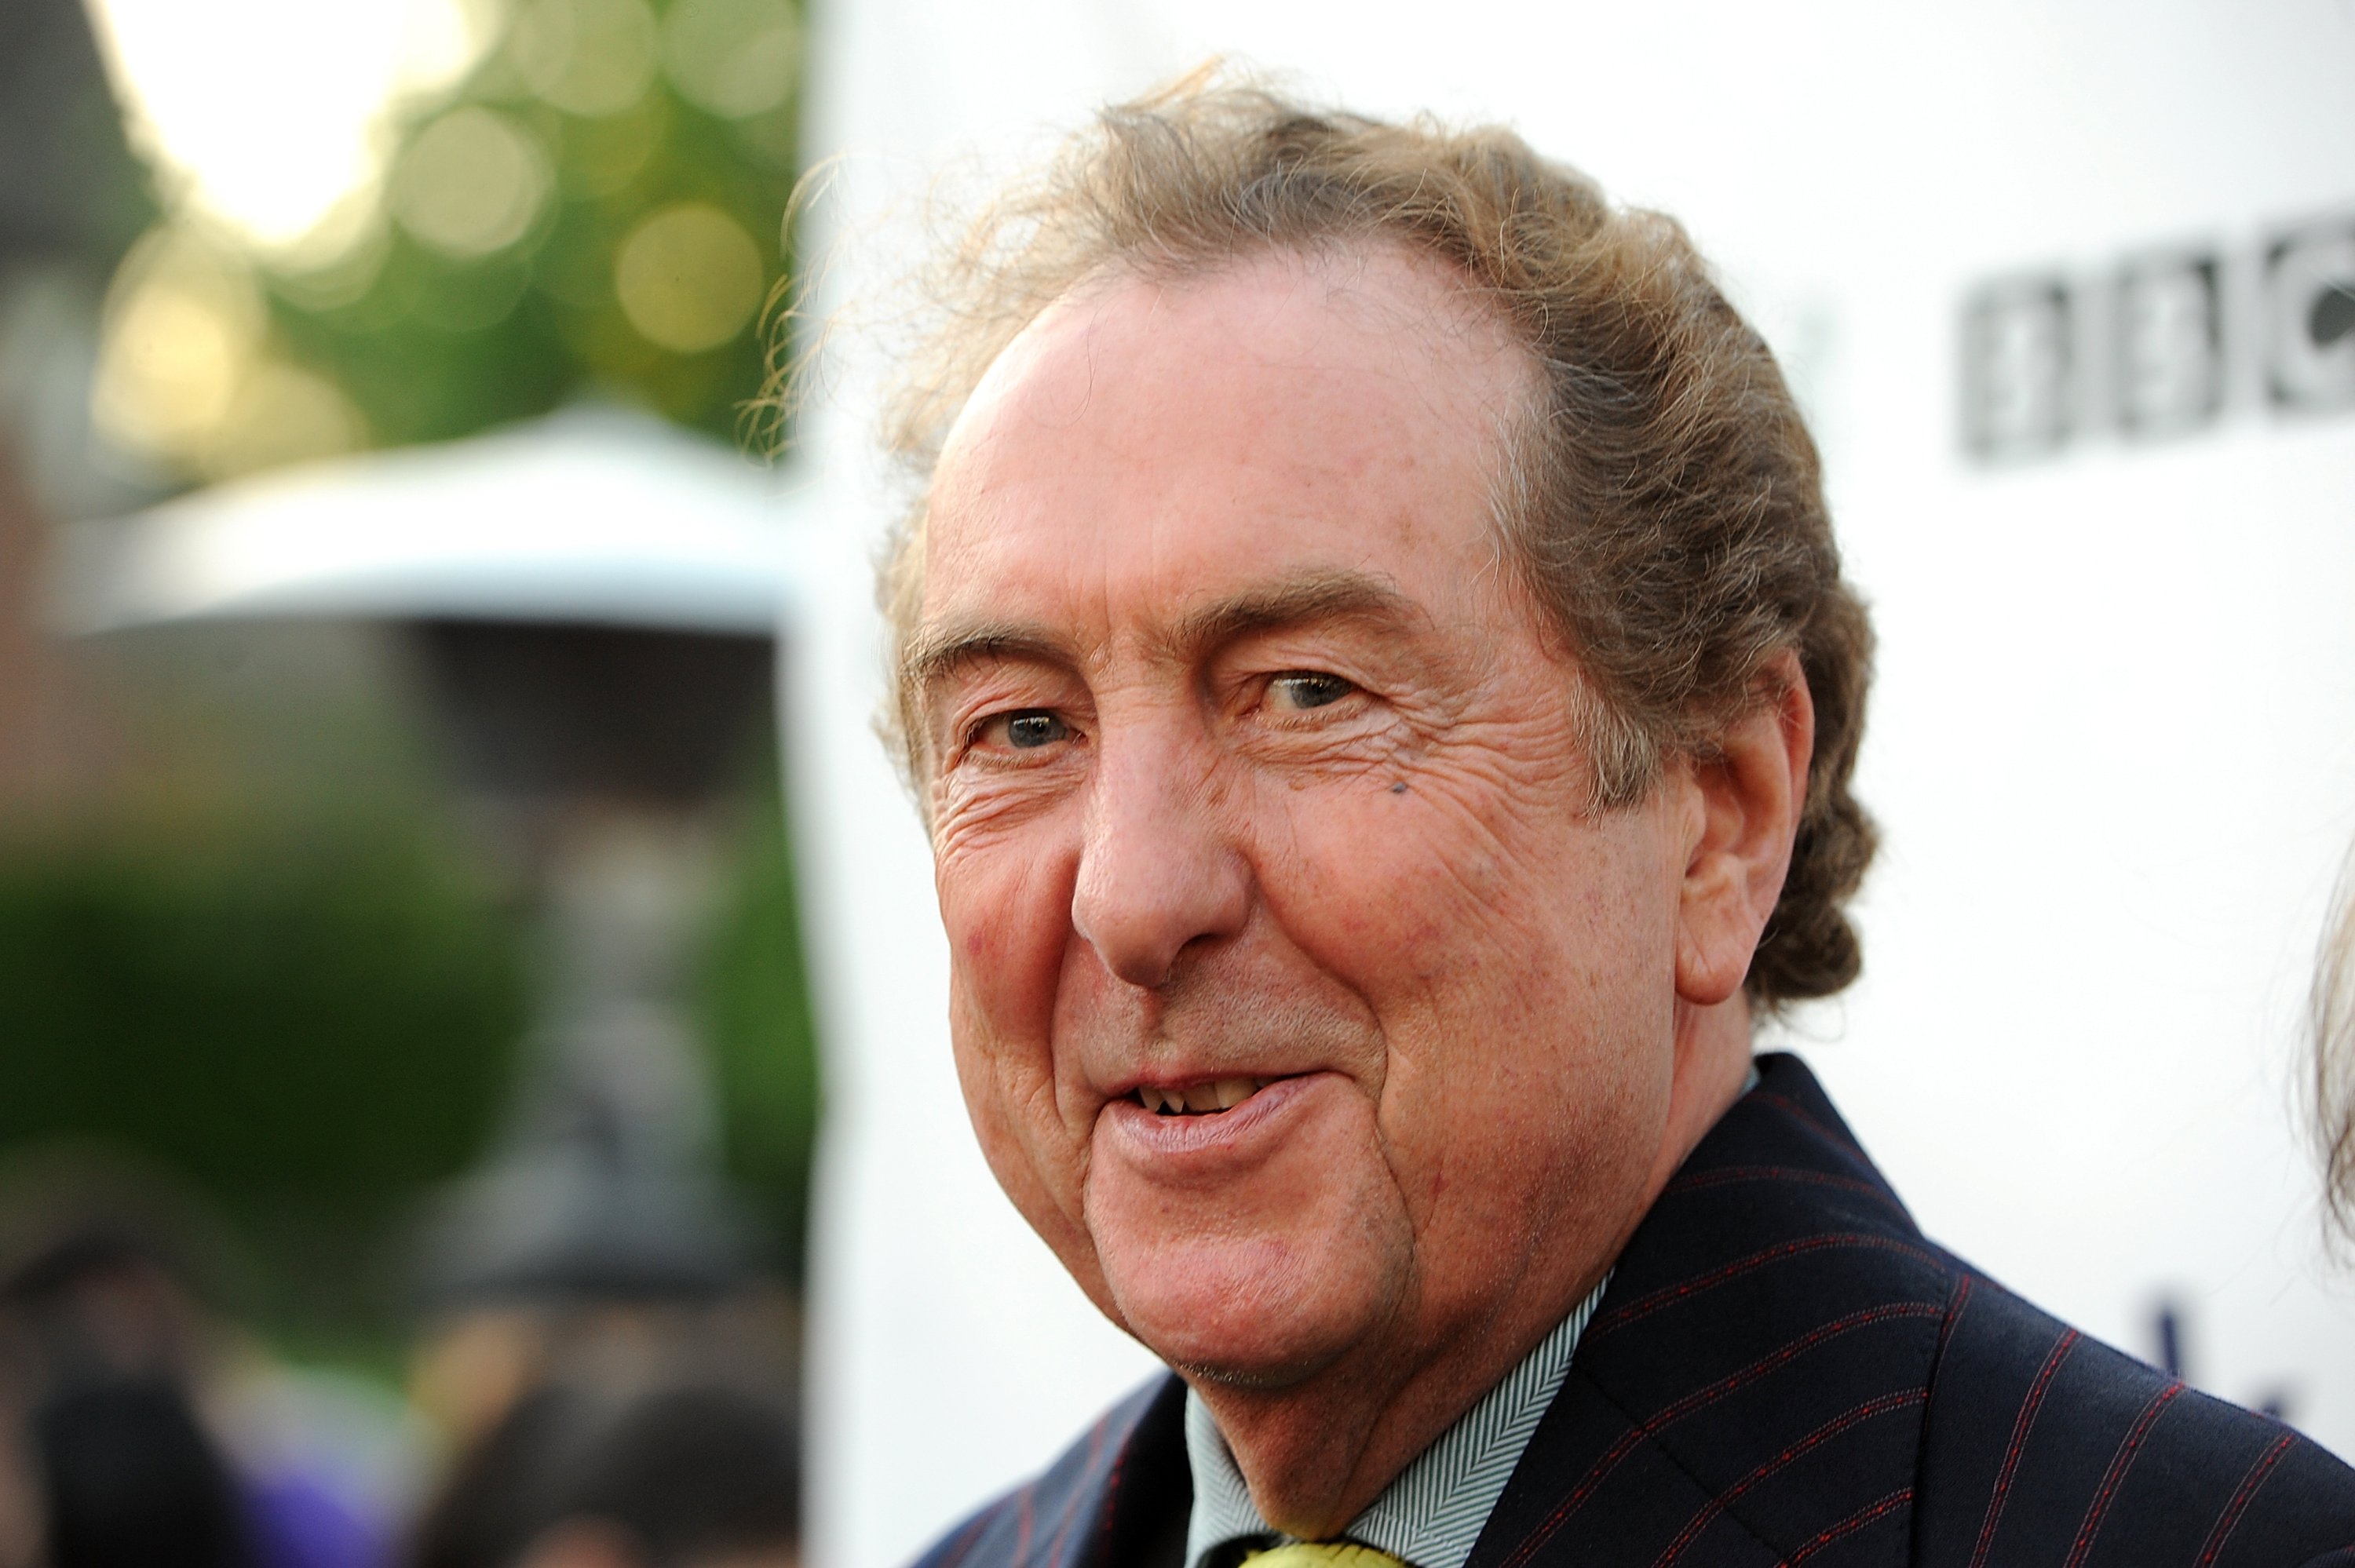 Eric Idle wearing a suit